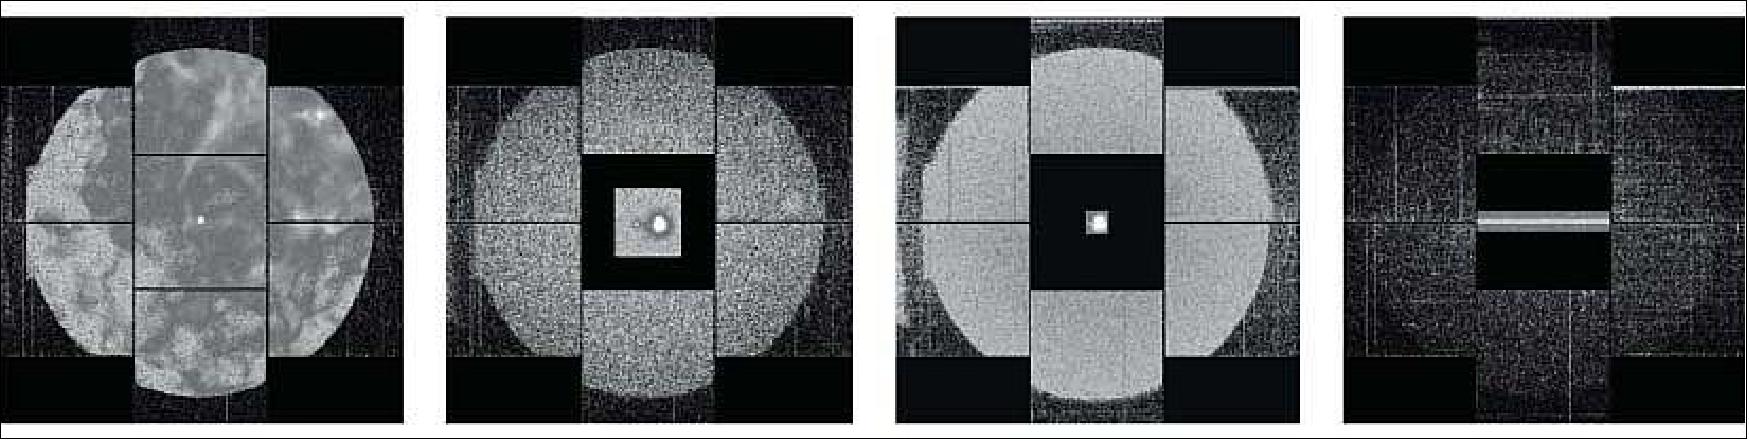 Figure 145: Representative images of the EPIC MOS camera acquired in the different operating modes. Left to Right: Full Frame Image, Large Window, Small Window, Timing (image credit: ESA)